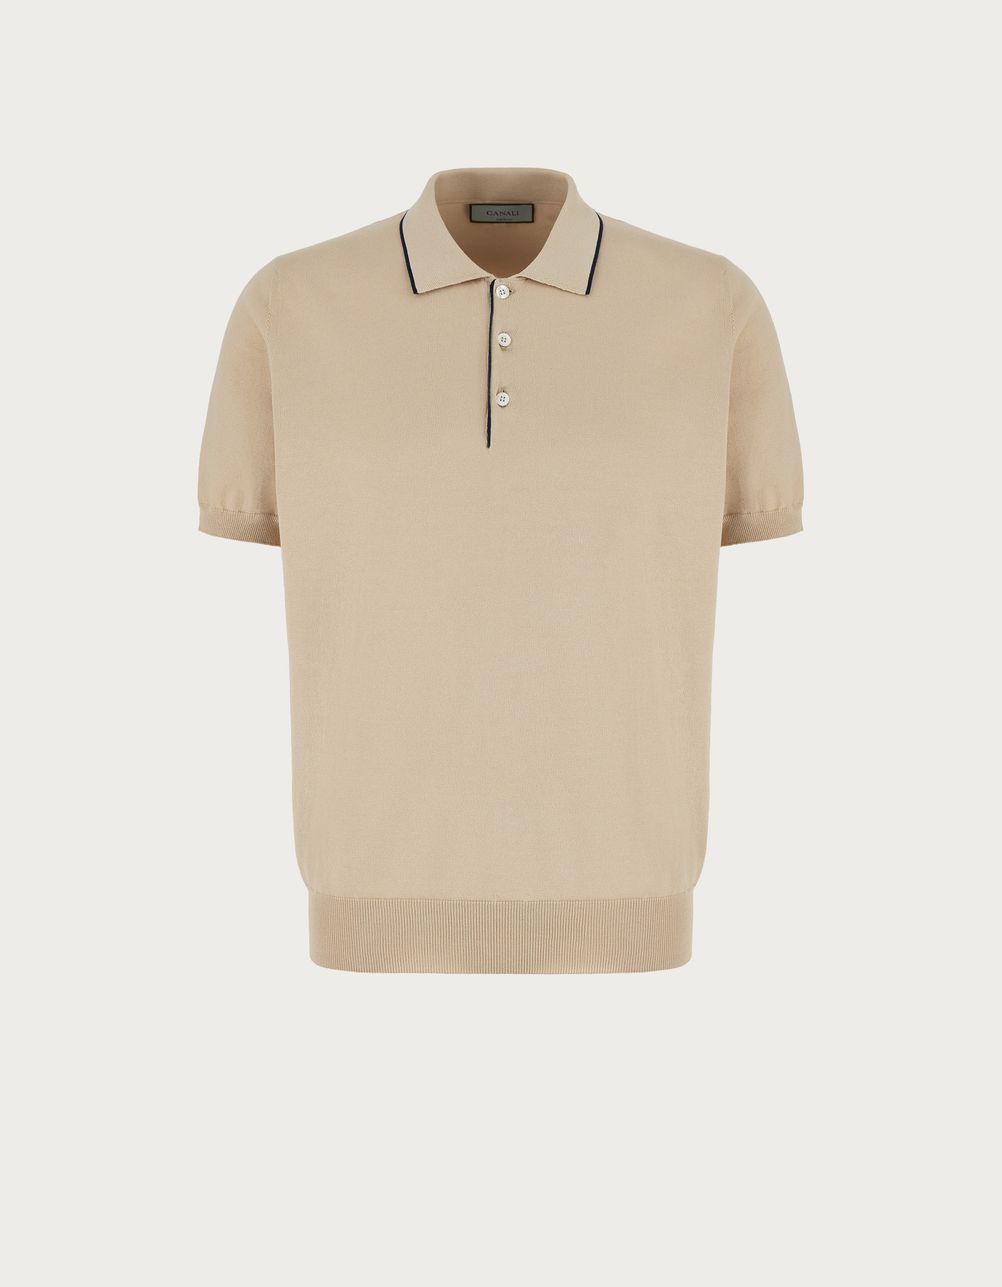 Blue and beige polo shirt in garment-dyed shaved cotton